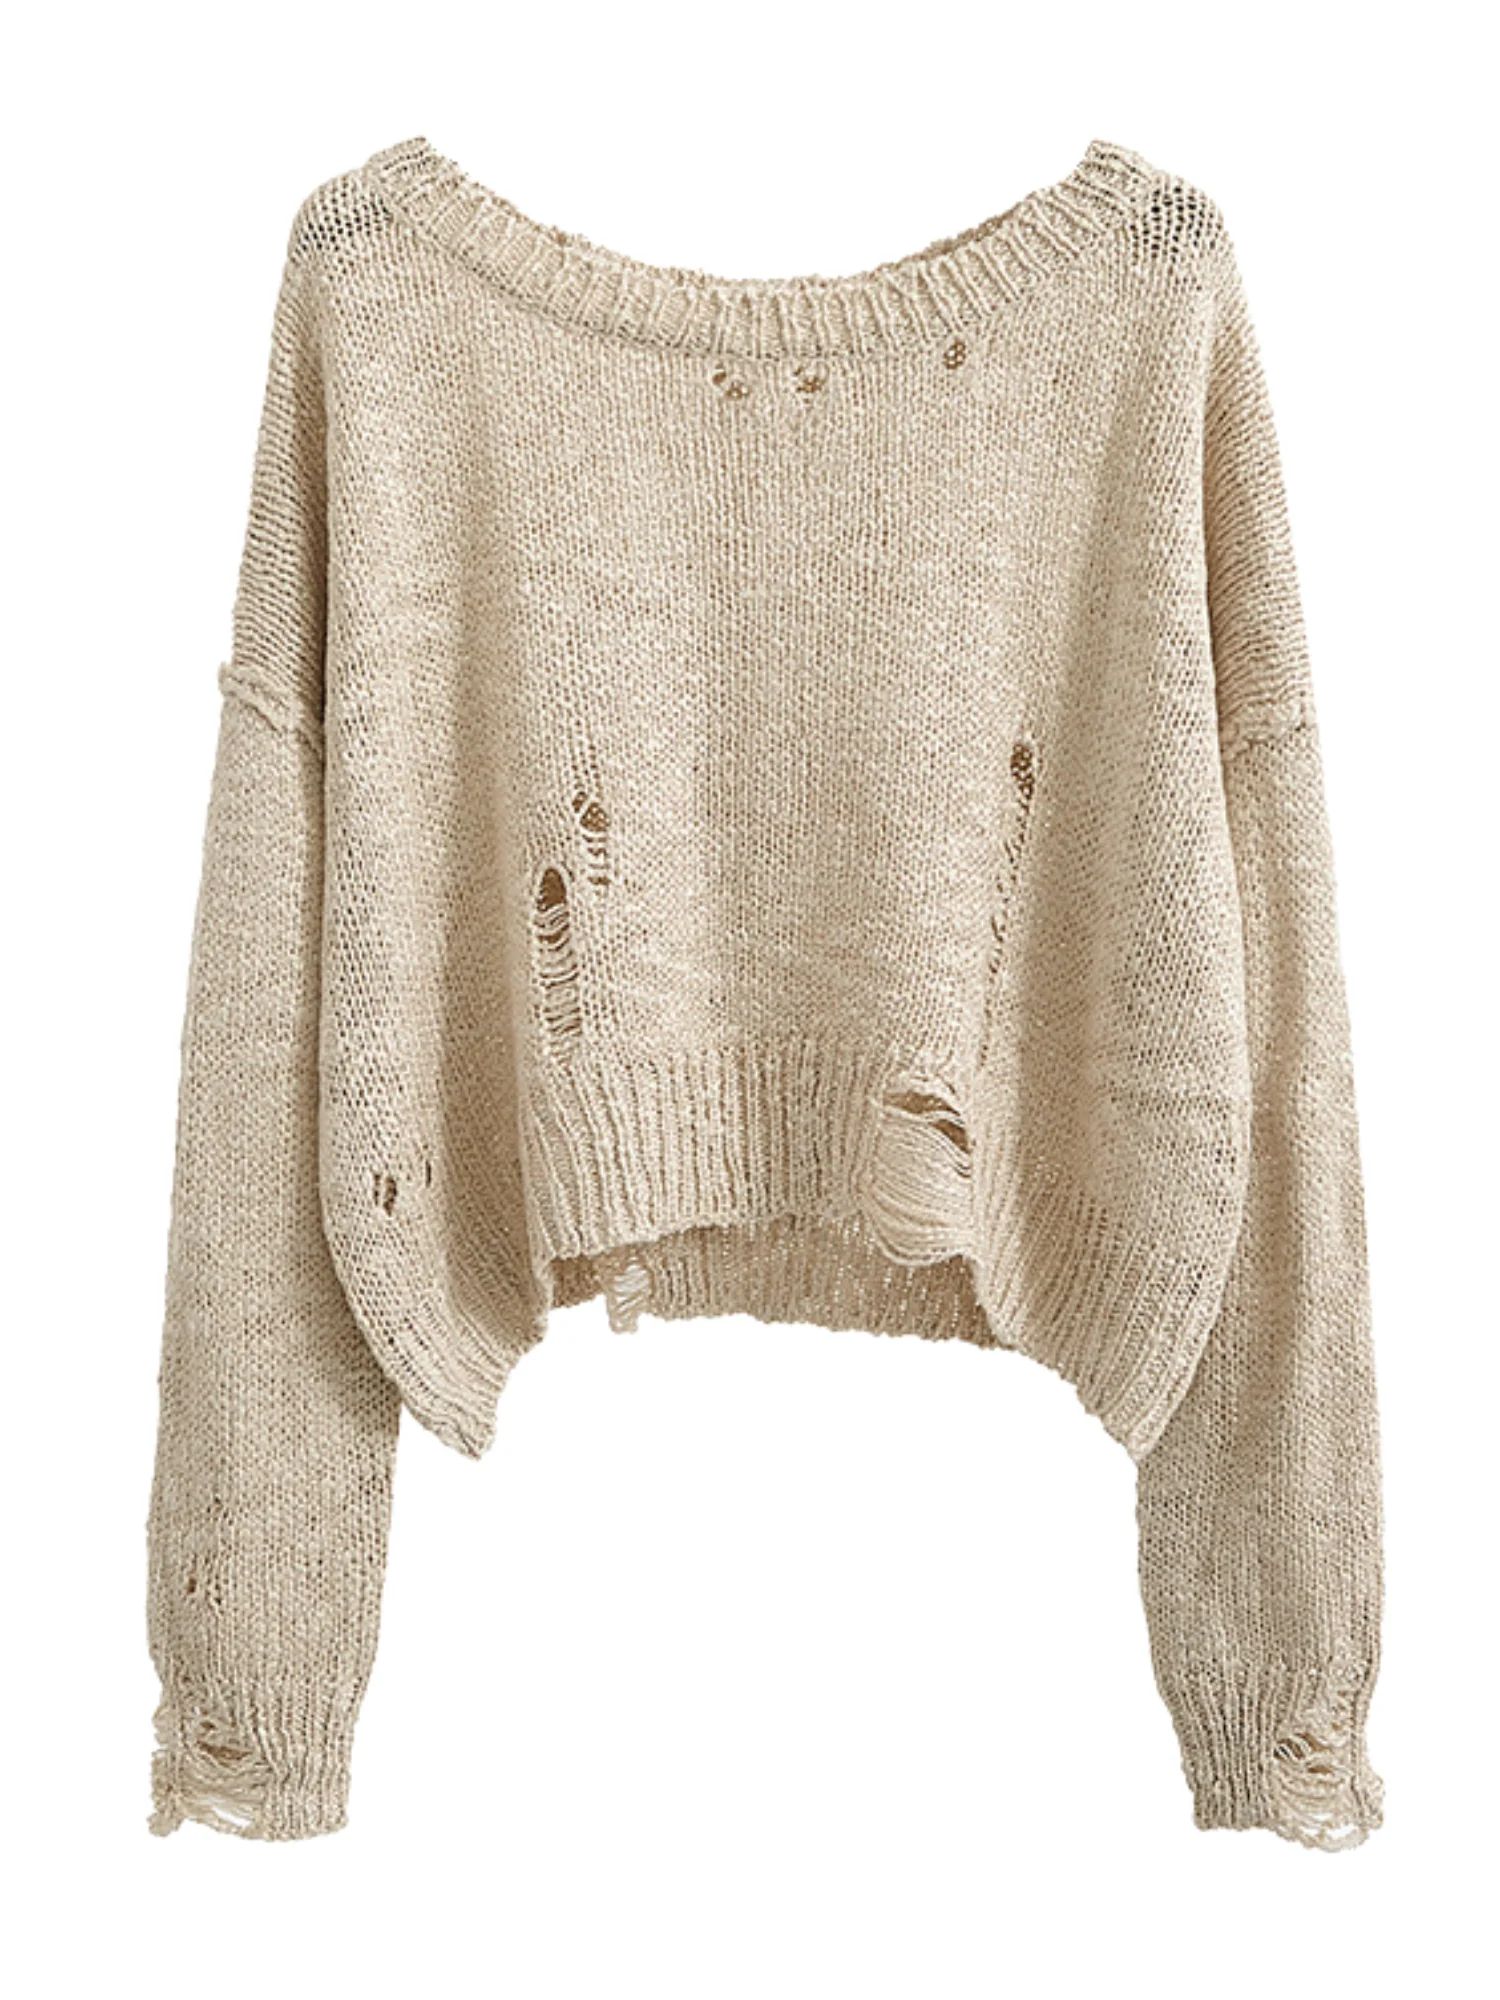 'Betsy' Distressed Lightweight Knitted Top (3 Colors) | Goodnight Macaroon